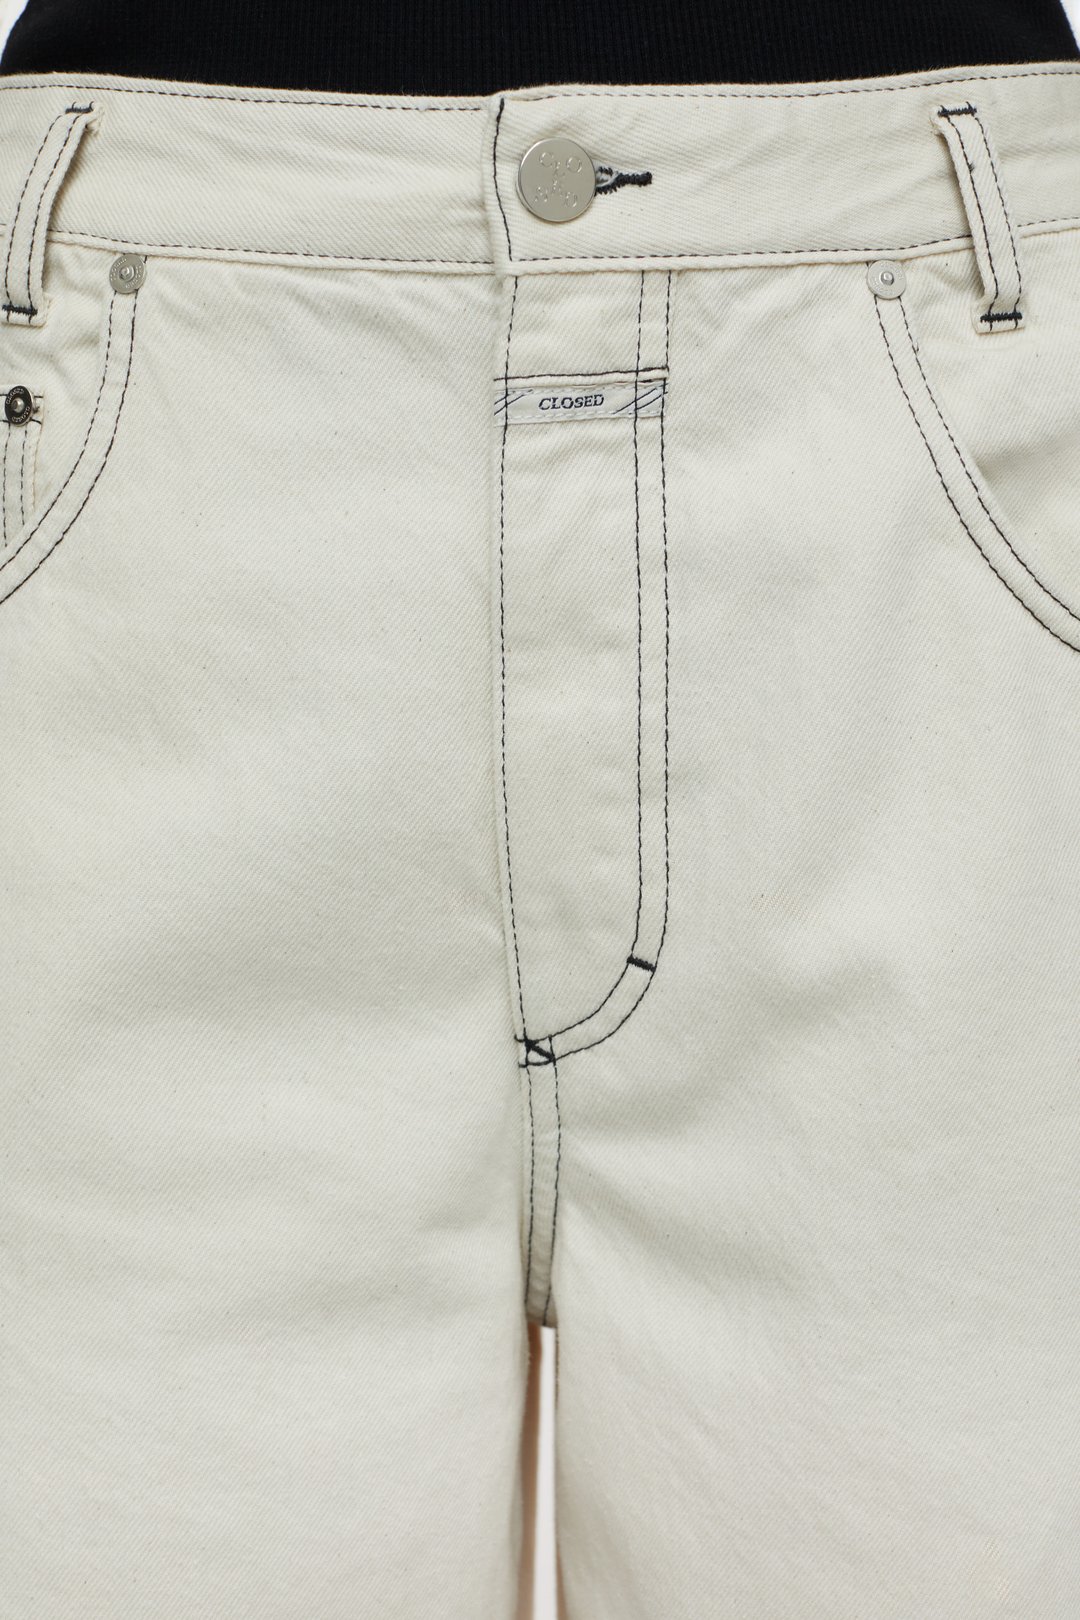 WIDE JEANS - STYLE NAME MORUS | CLOSED